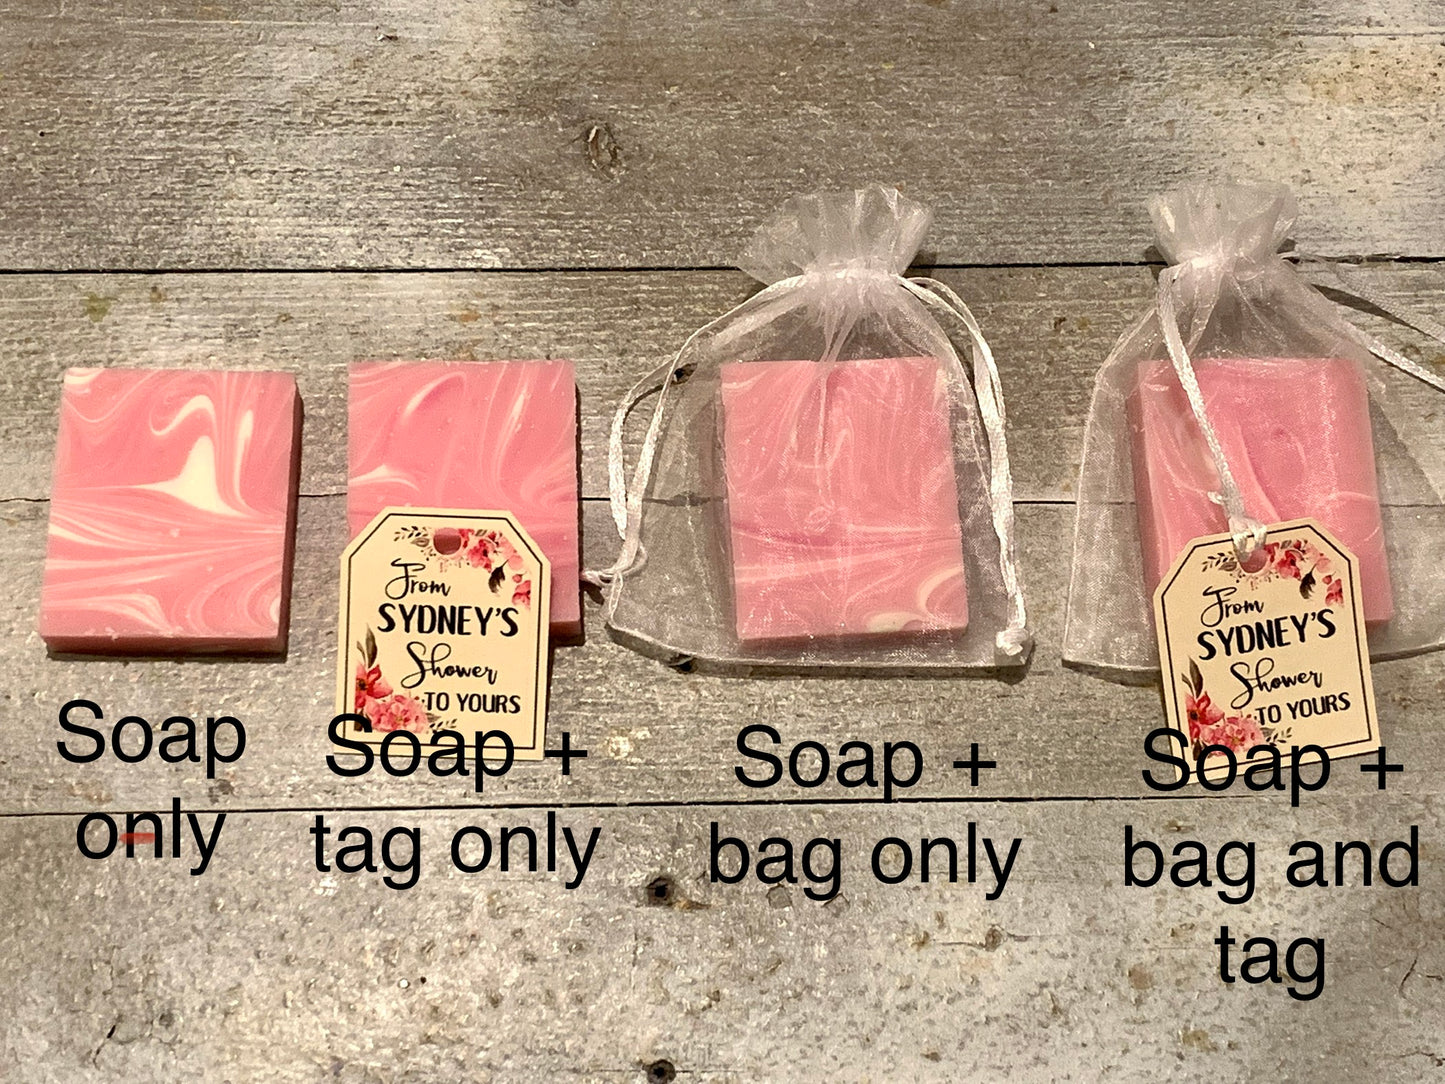 Mini soap shower favors in white mesh bags with pink floral tags